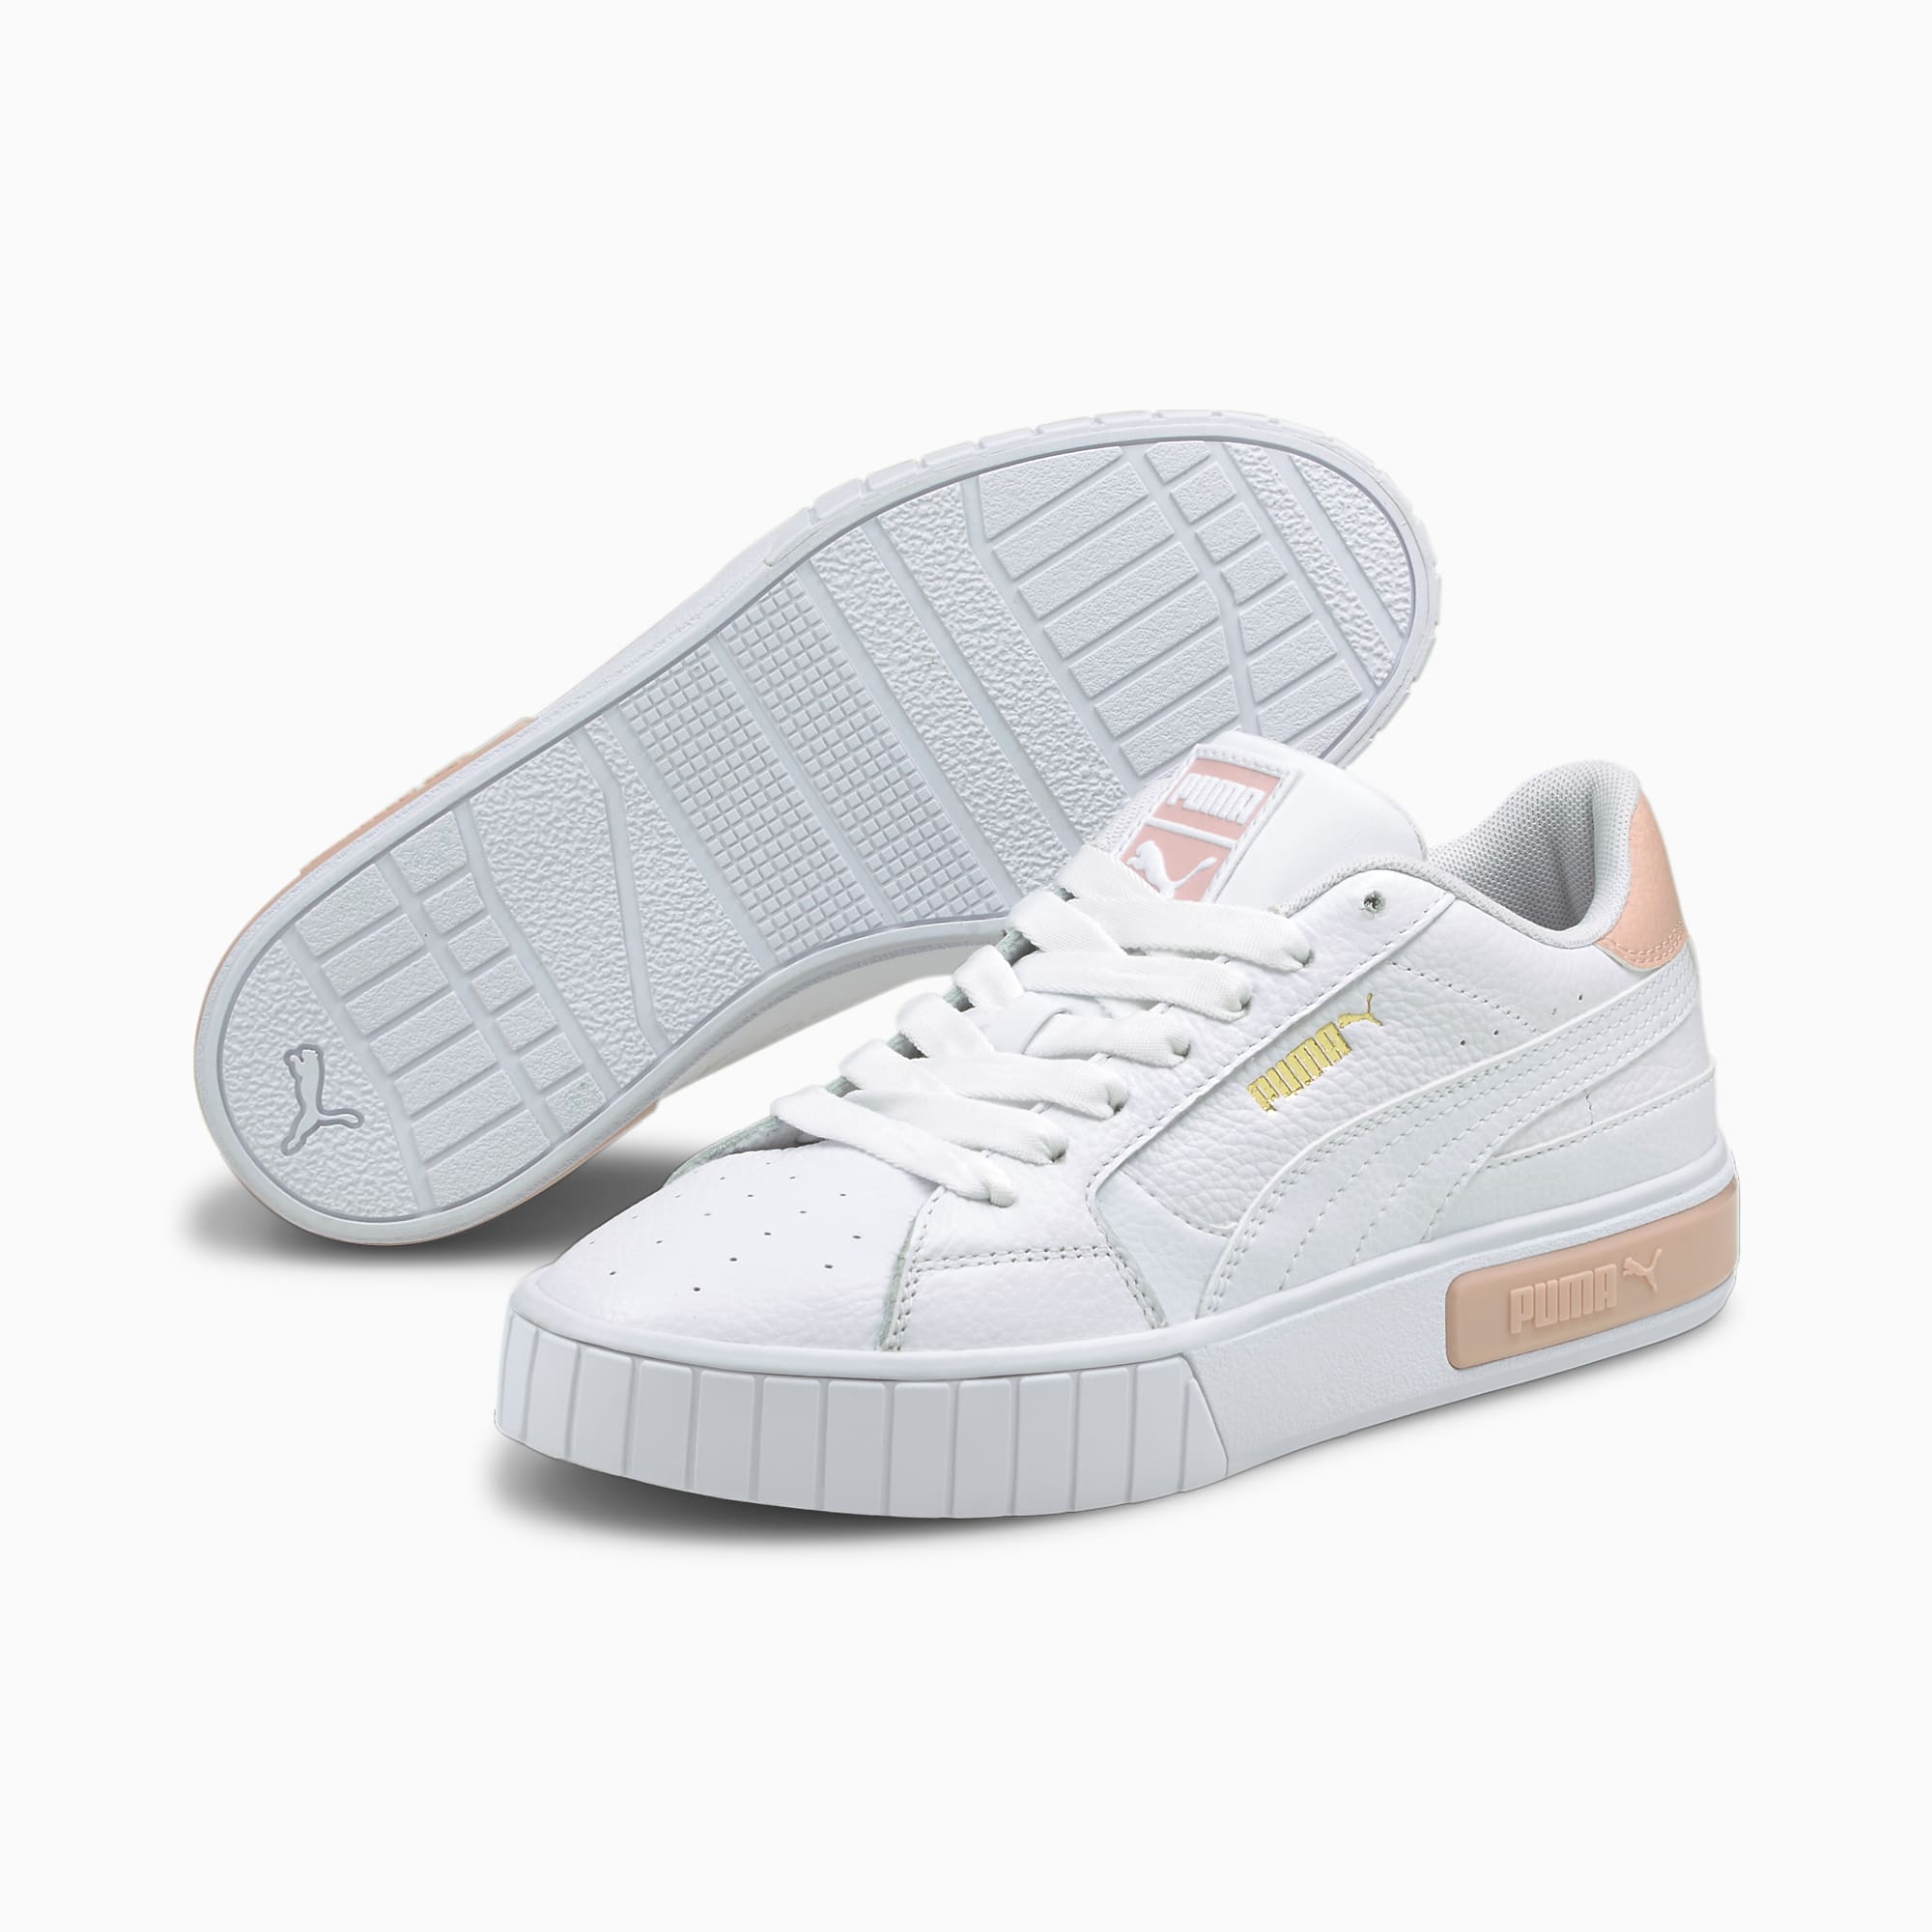 Cali Star - Women's by Puma Online, THE ICONIC